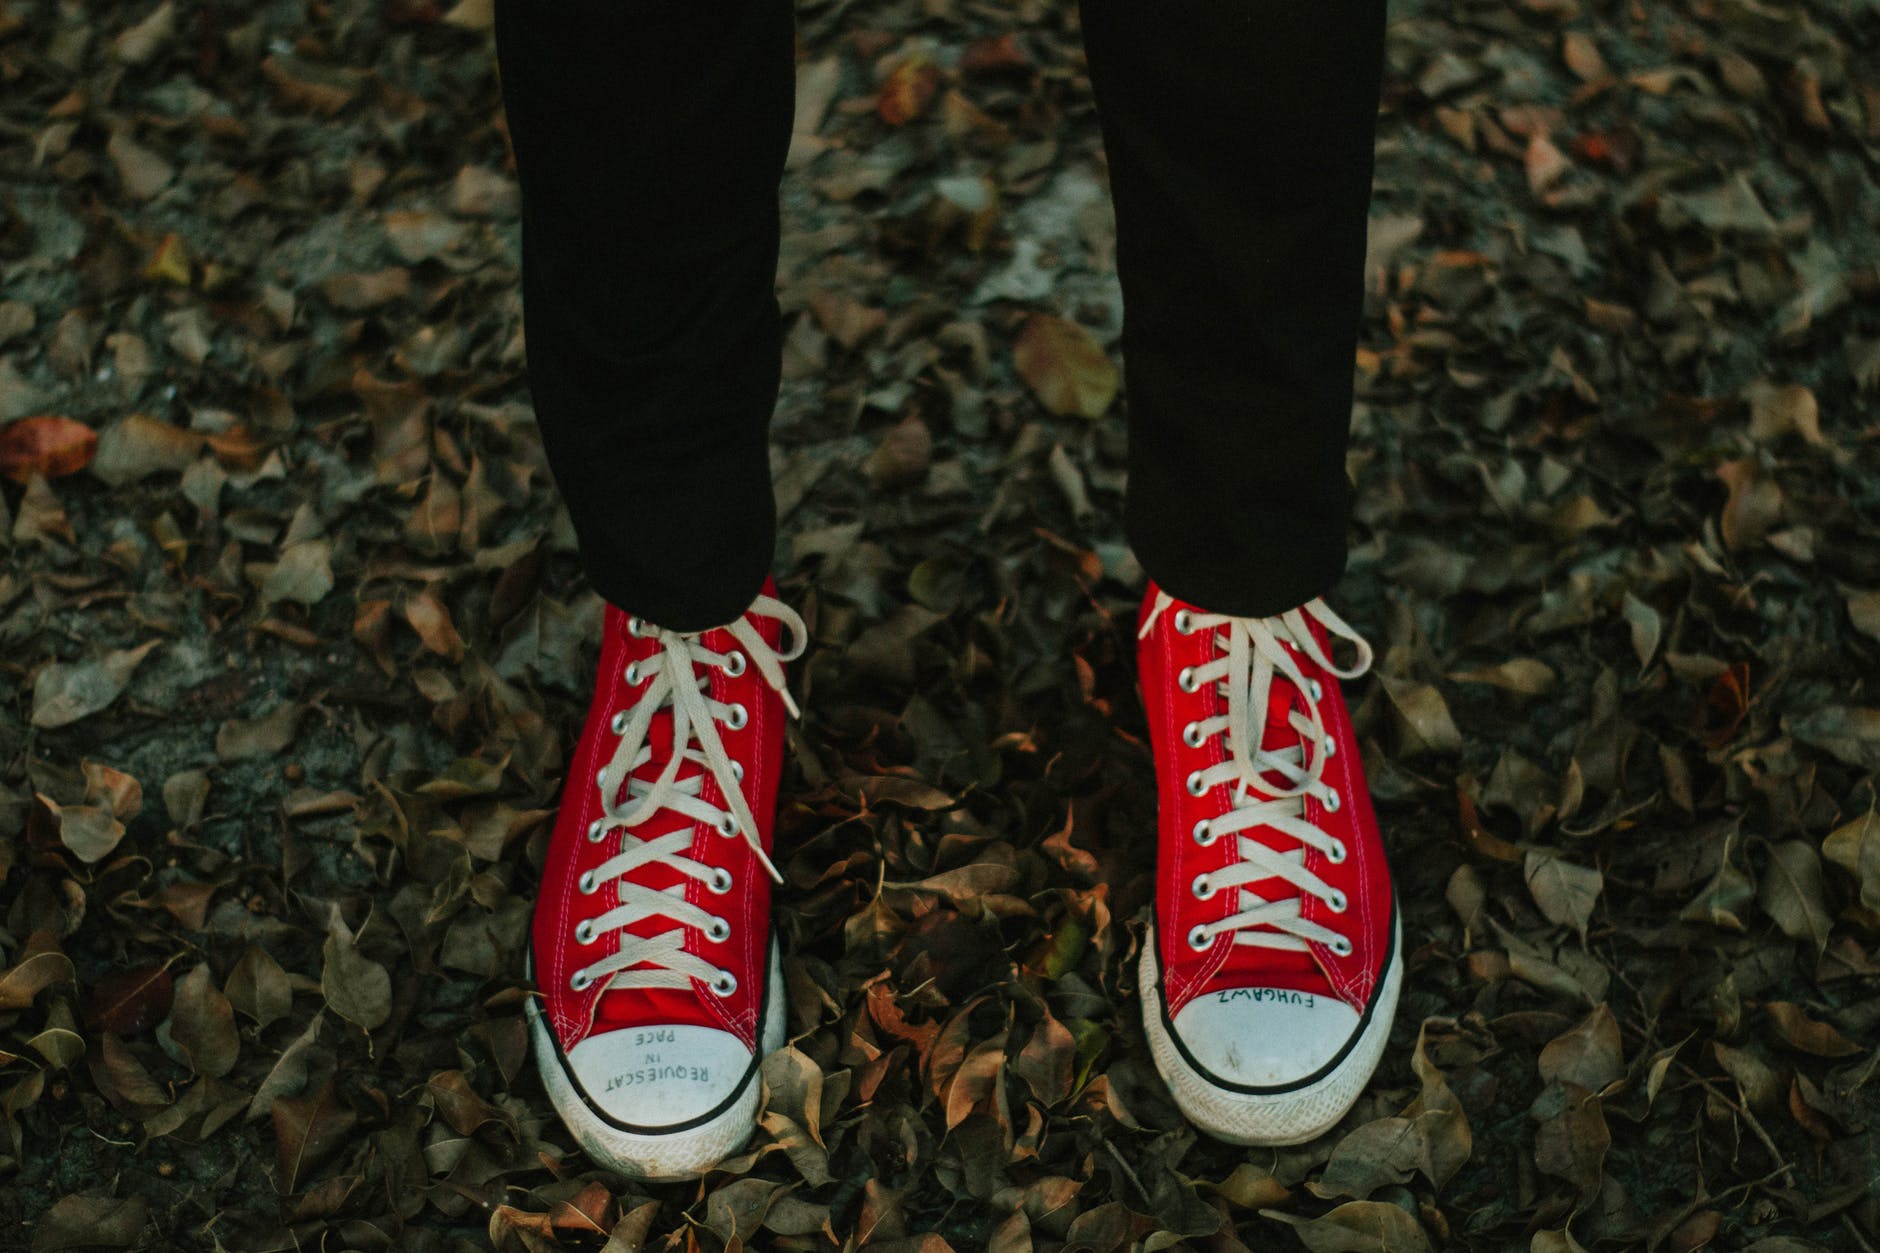 person wearing red and white sneakers standing on withered leaves